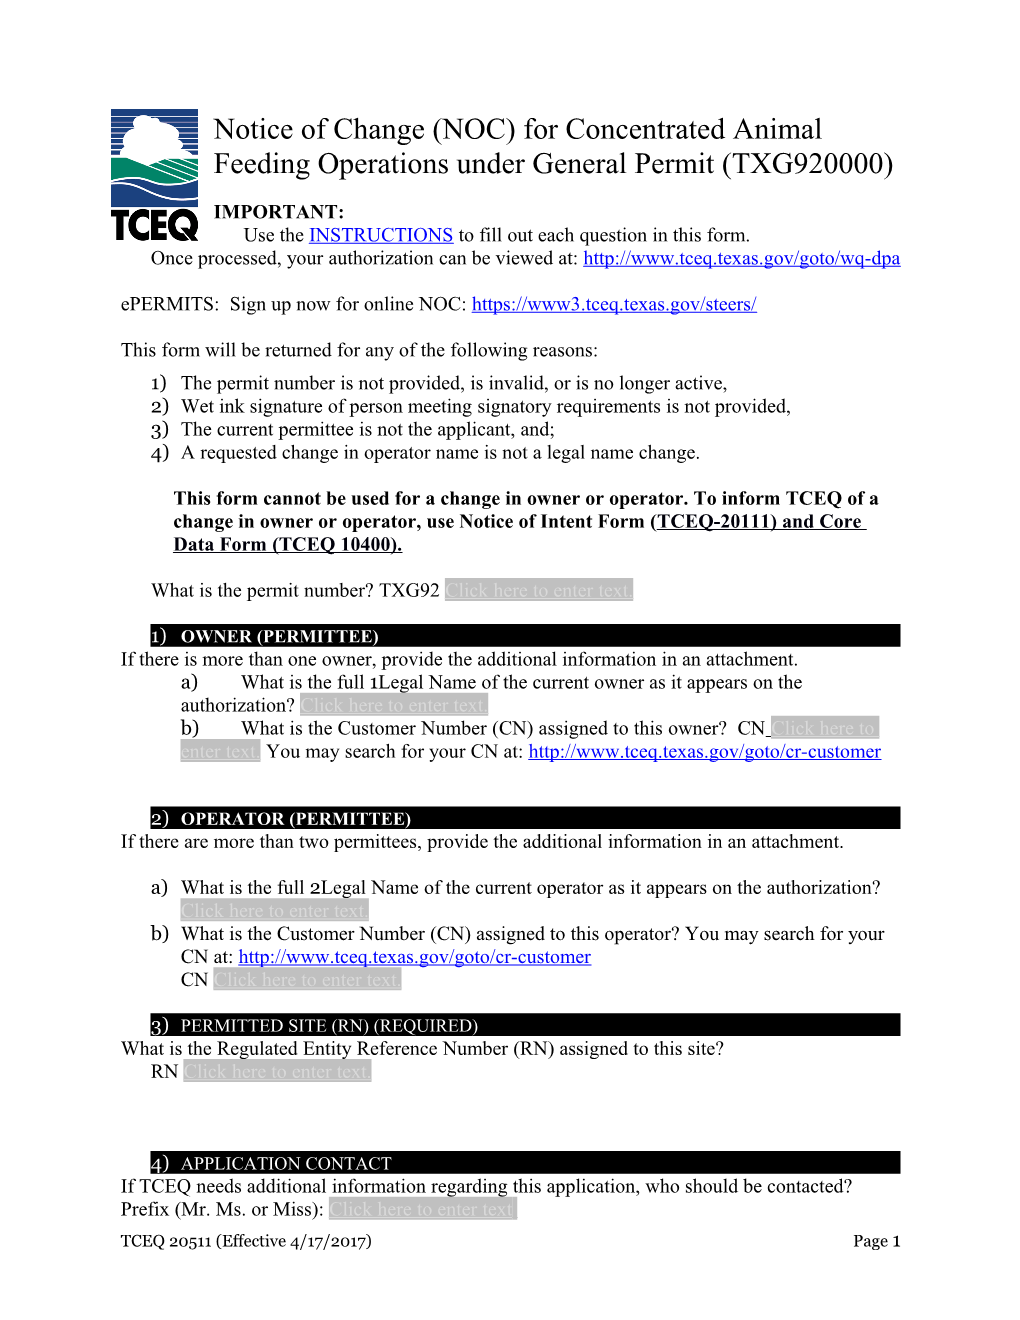 Notice of Change for a Concentrated Animal Feeding Operation Under TXG920000